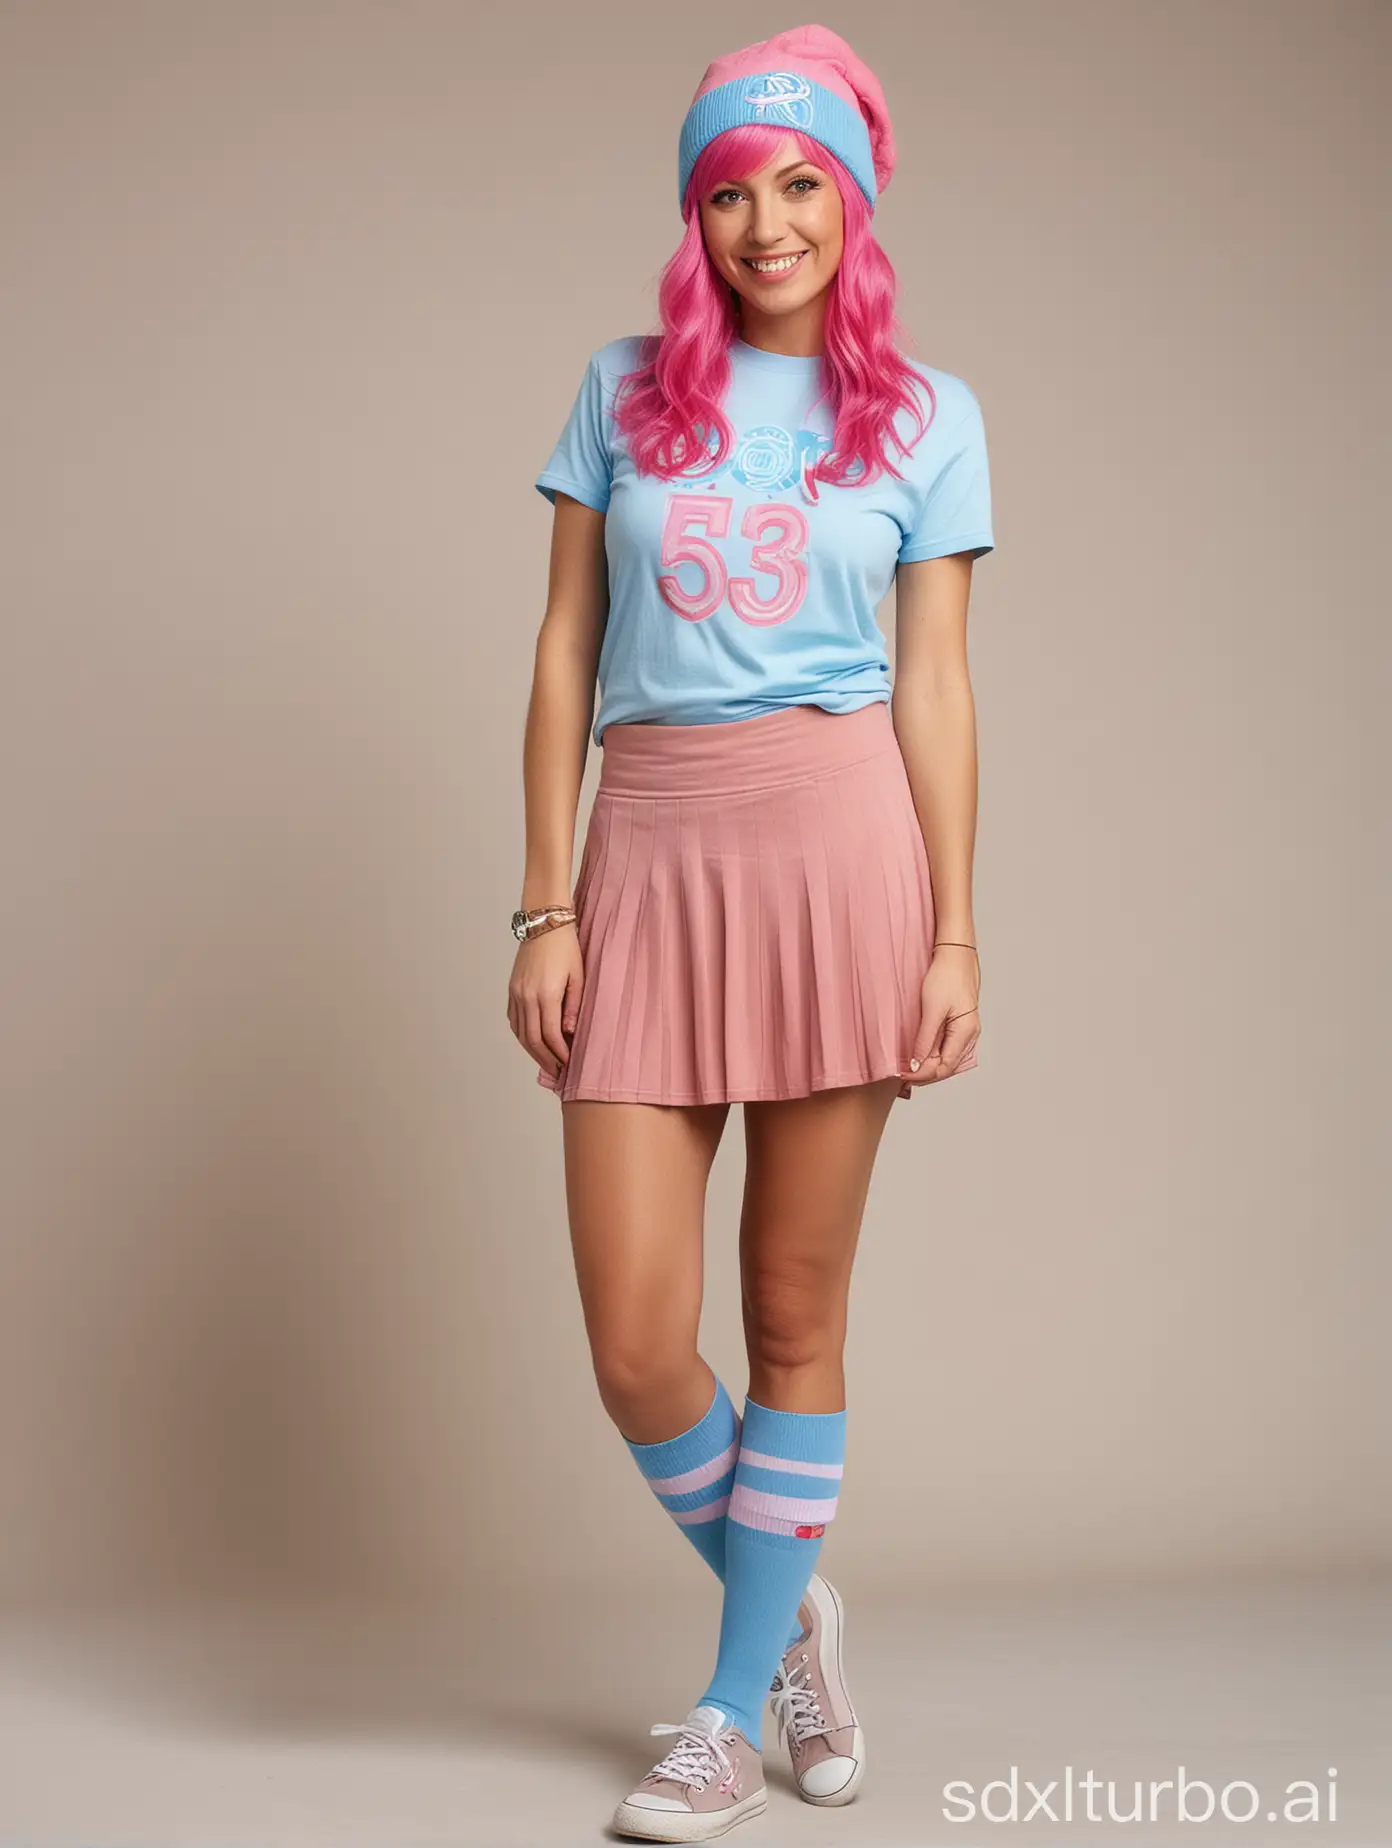 A cool middle aged Swiss woman; 53 years old, wearing a long bright pink wig, dark brown eyes; wearing a light blue beanie cap hat on her head, dressed in a short light beige top adorned with a teenager symbol, a short dark brown knee length skirt and wearing long dark brown socks, black sneakers, with a smile in a full body standing photo.